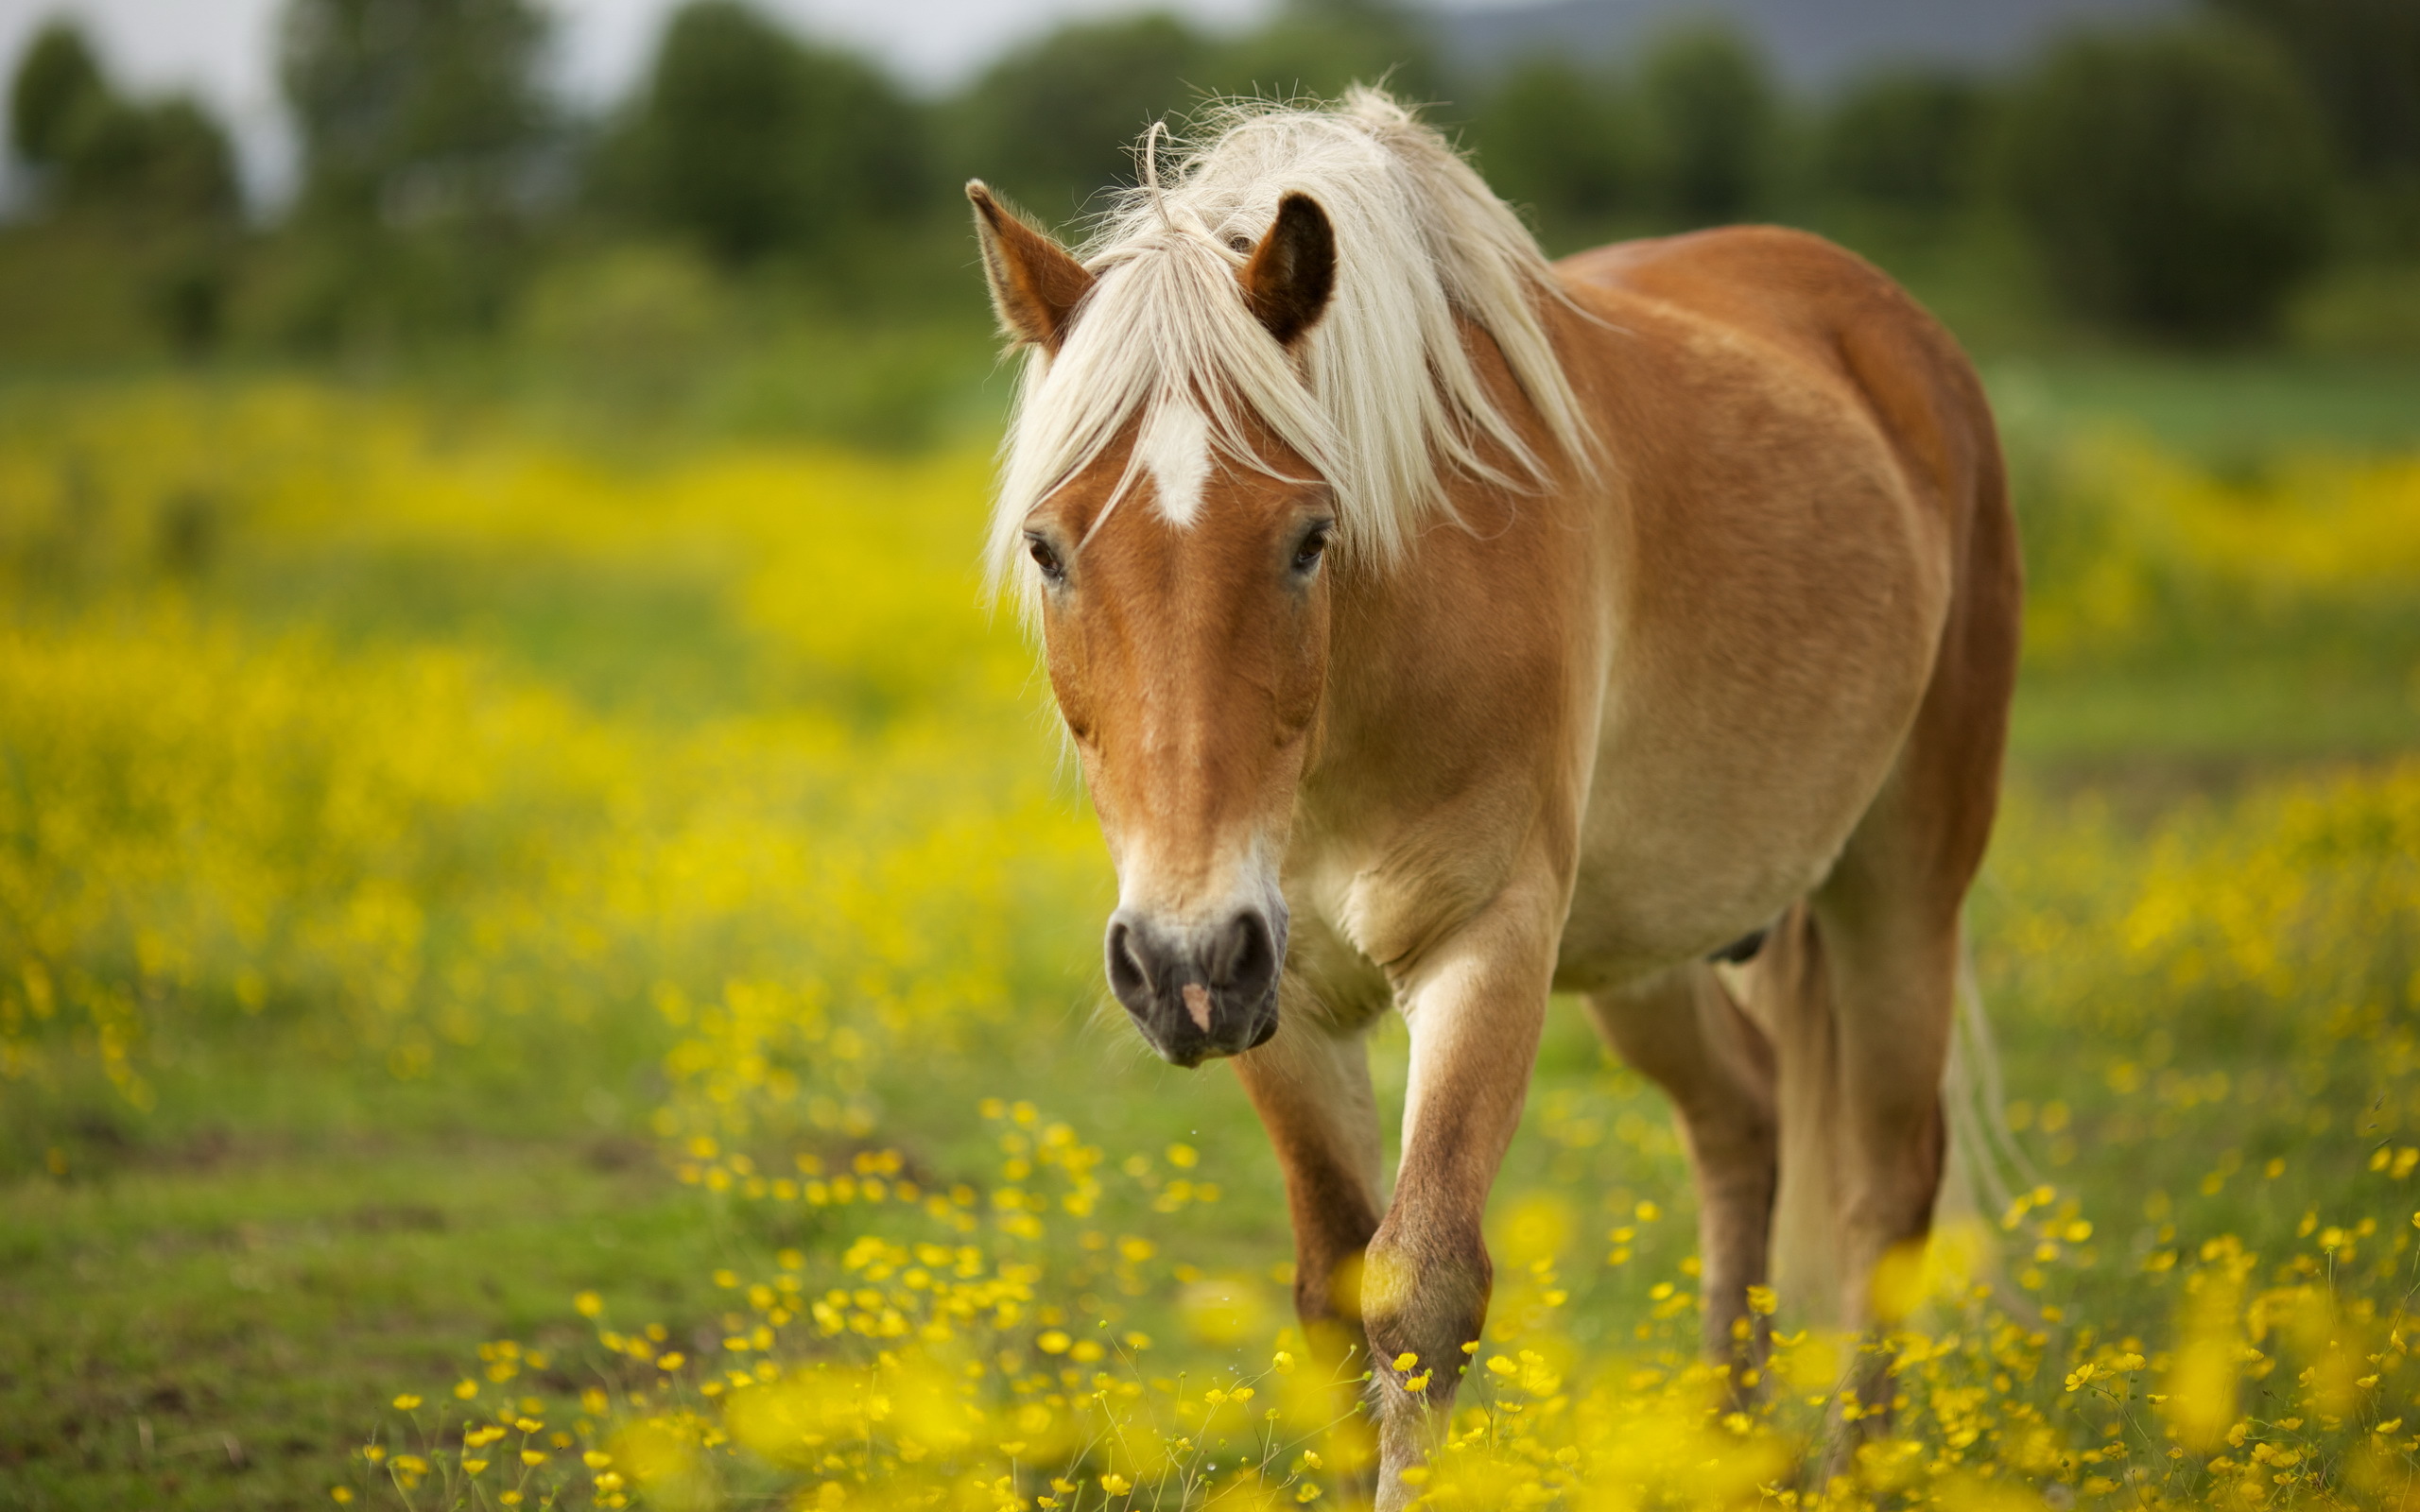 Cute Horse Wallpaper Which Is Under The